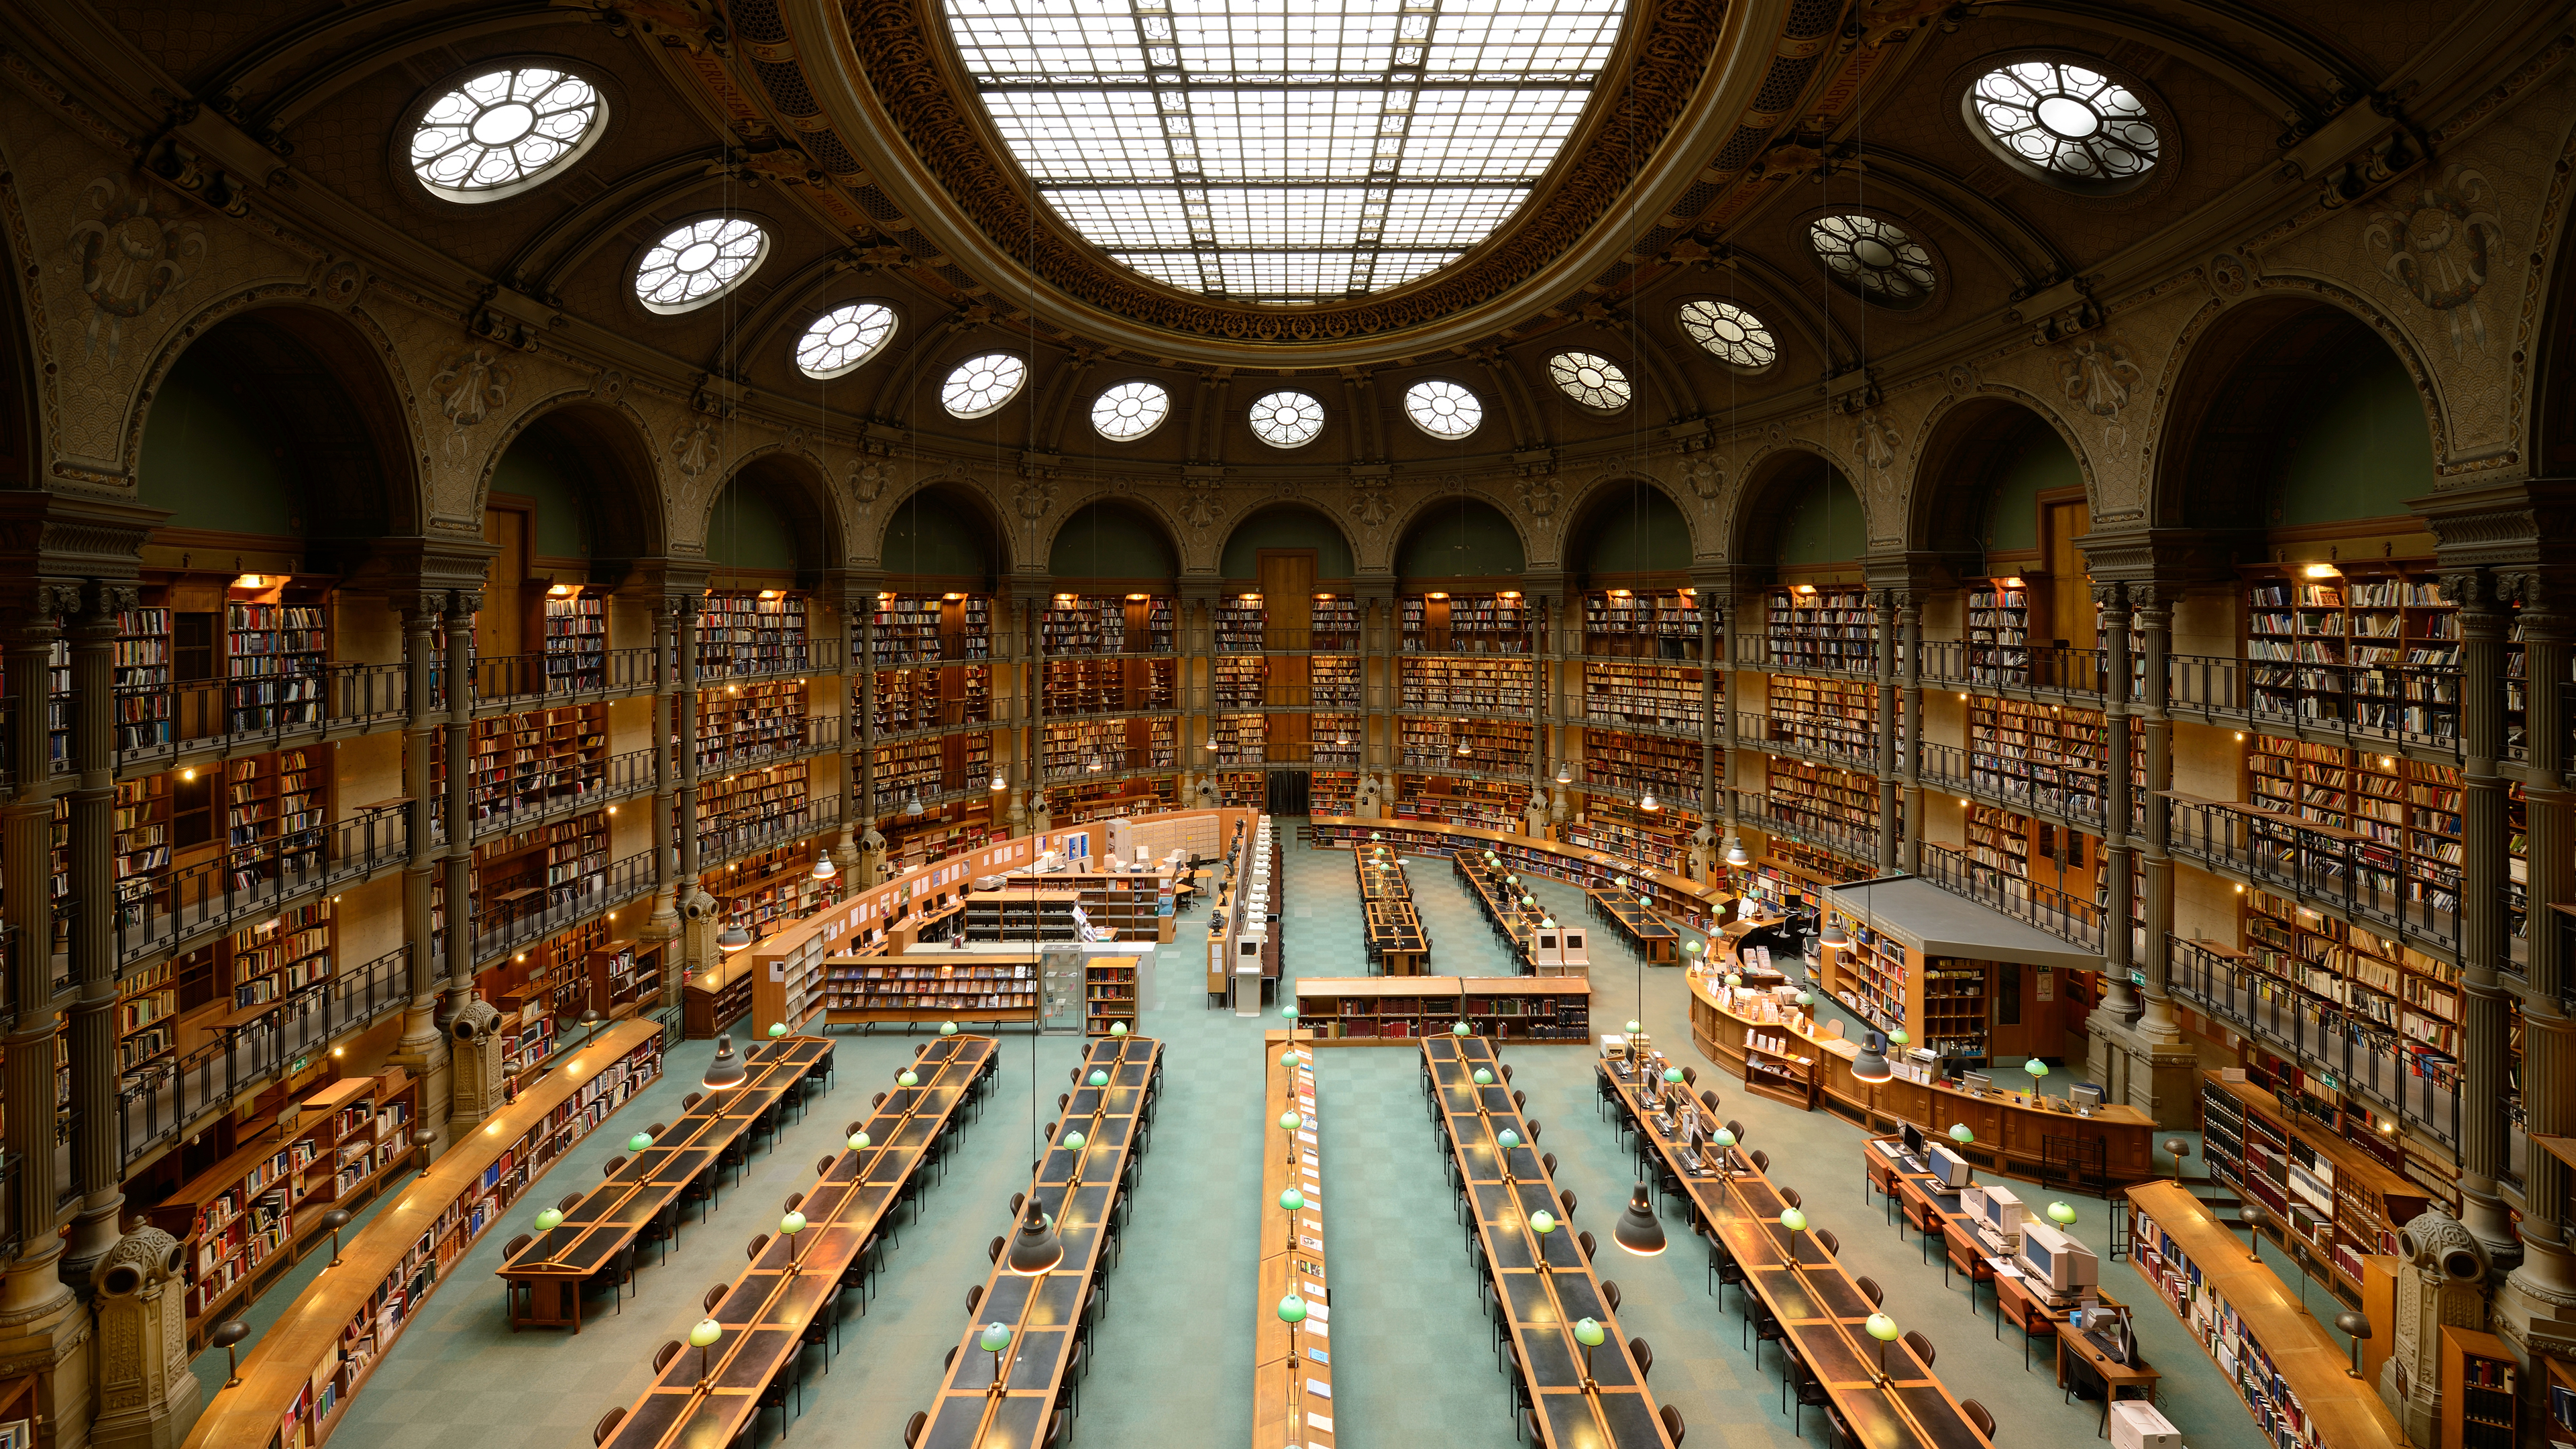 General 3840x2160 library France architecture bookshelves